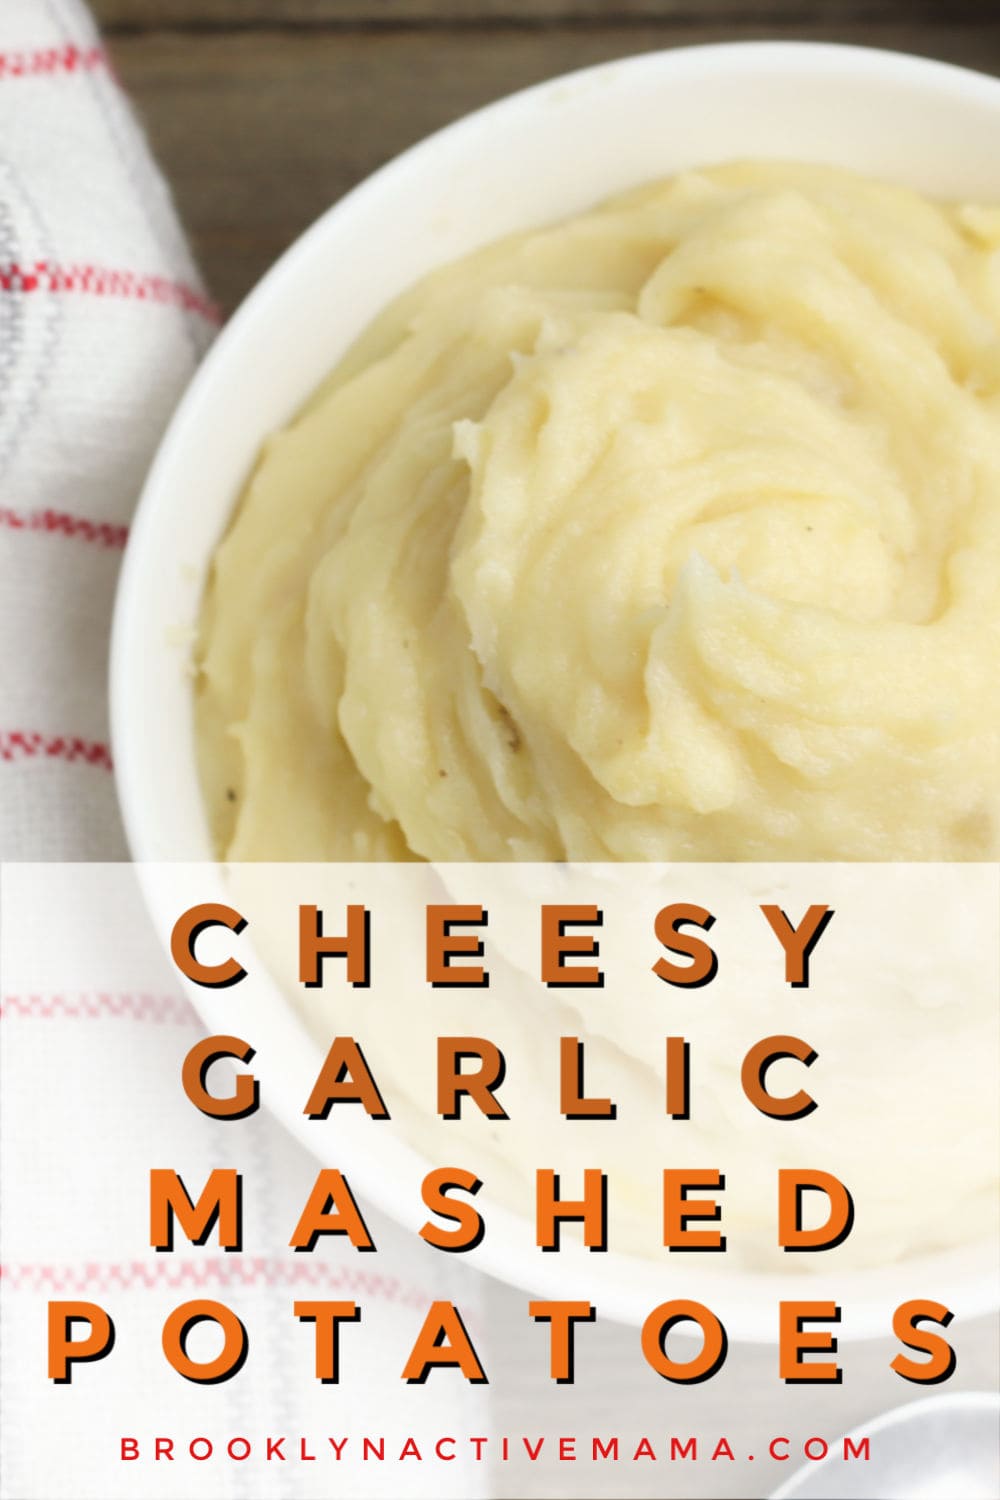 This crockpot mashed potatoes with cheddar recipe takes requires no boiling. It's perfectly delicious for thanksgiving or your next dinner party! #thanksgivingsides #thanksgivingrecipes